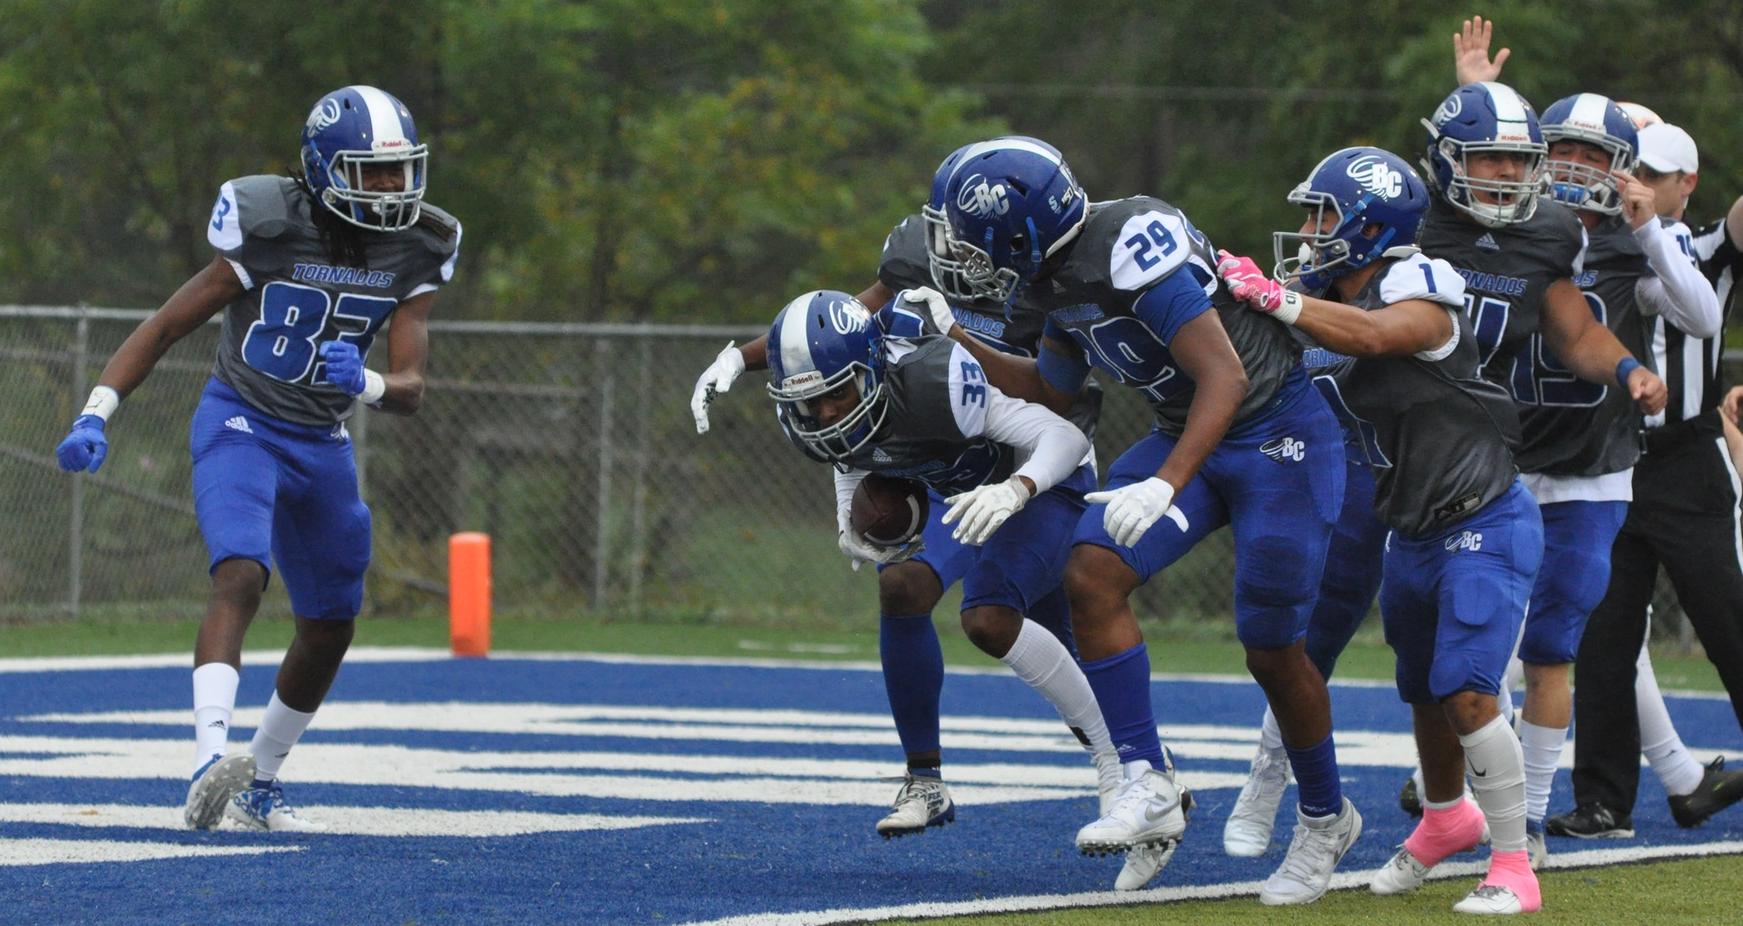 The Brevard College special teams unit celebrates a fumble recovery touchdown in Saturday's 22-10 triumph over Maryville College (Courtesy of Tommy Moss).